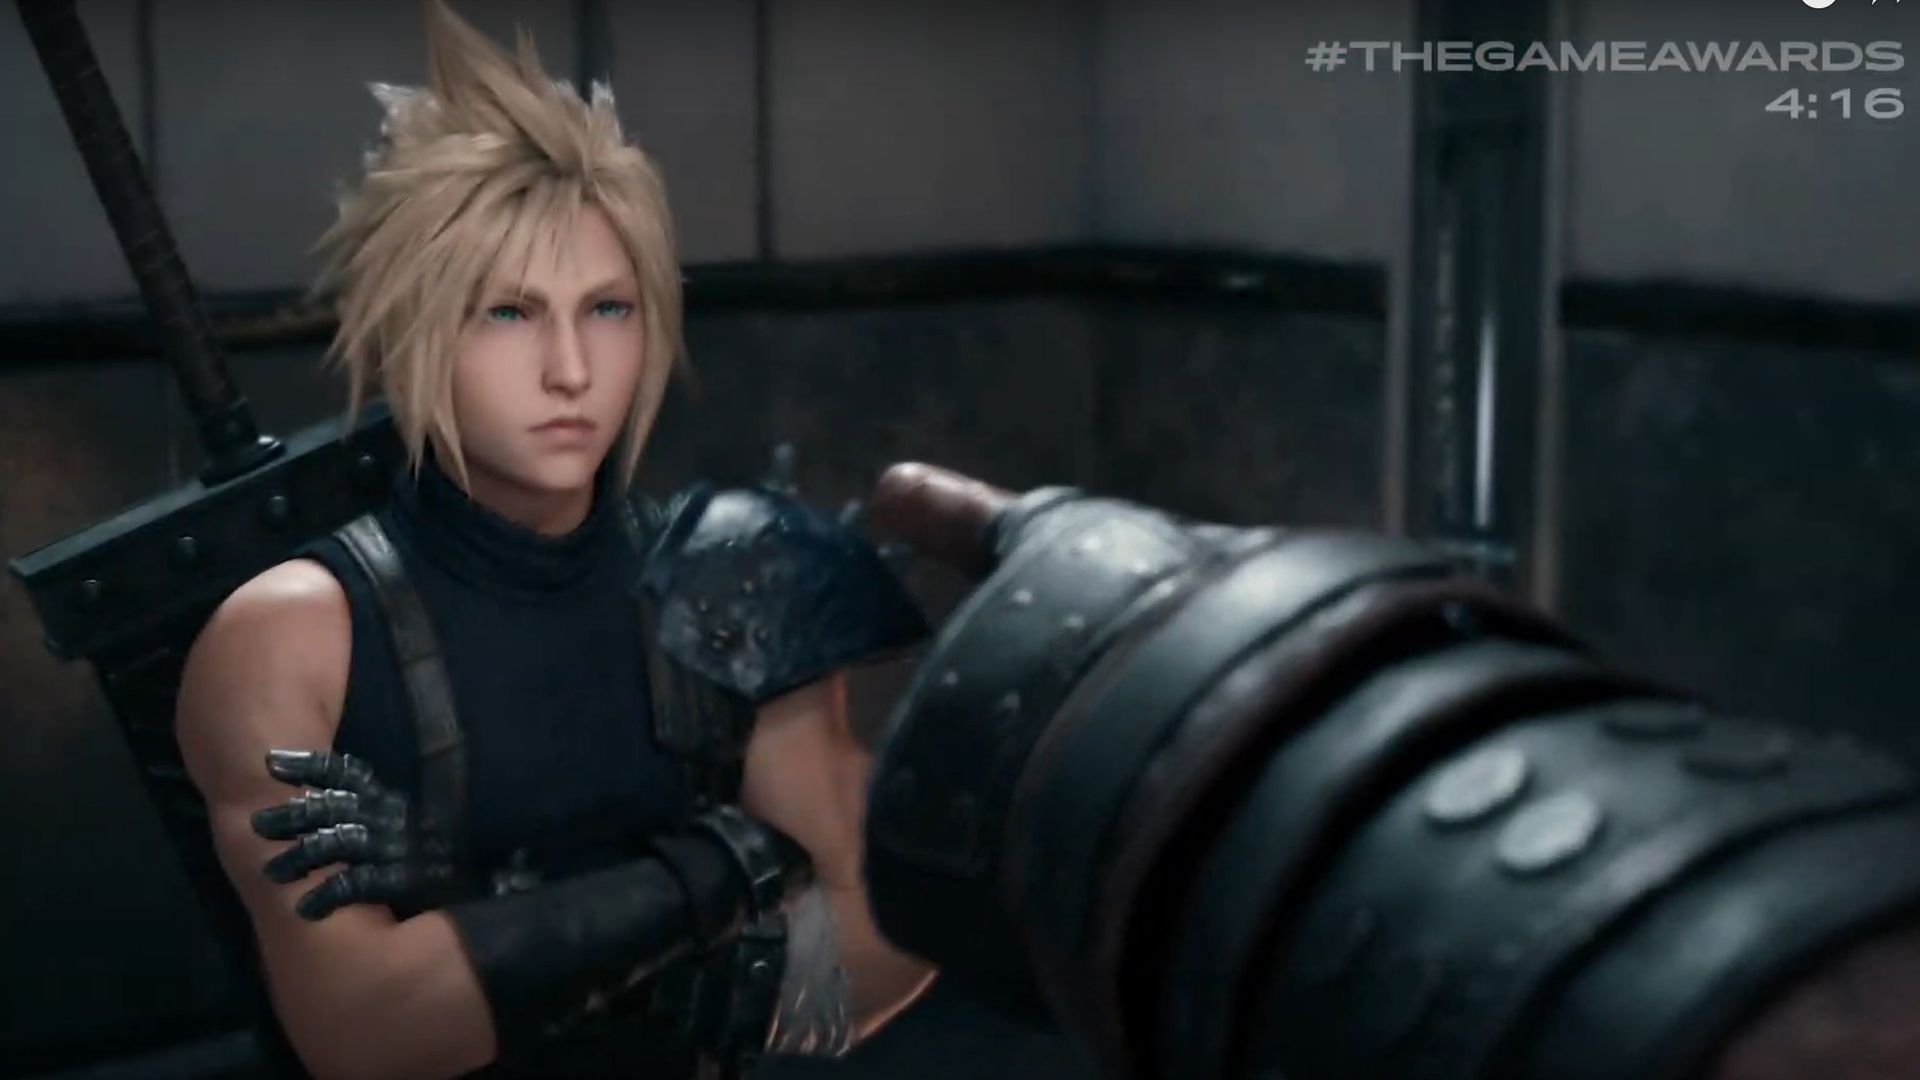 Final Fantasy Vii Remake Just Got A Jaw Dropping New Trailer At The Game Awards Techradar